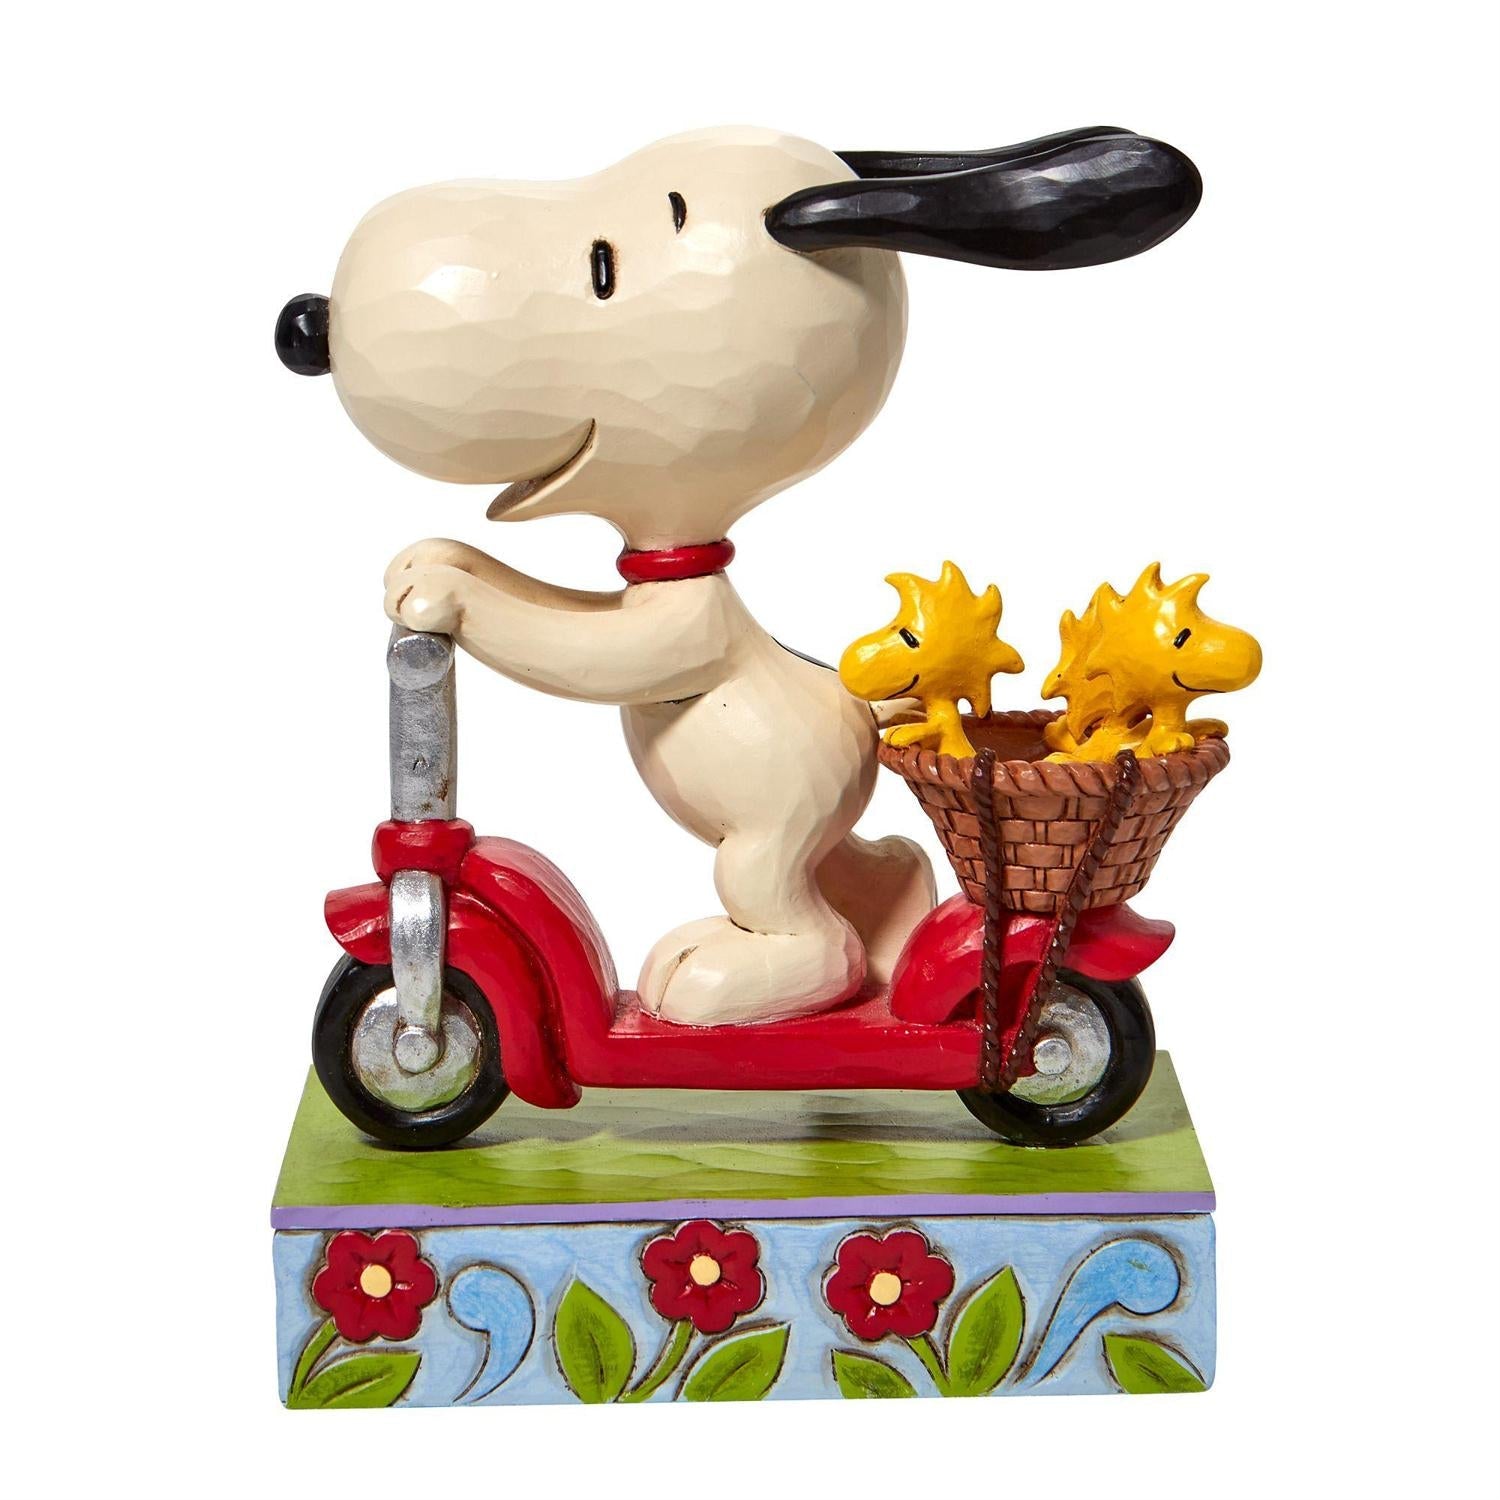 Peanuts by Jim Shore Snoopy Riding Scooter Figurine